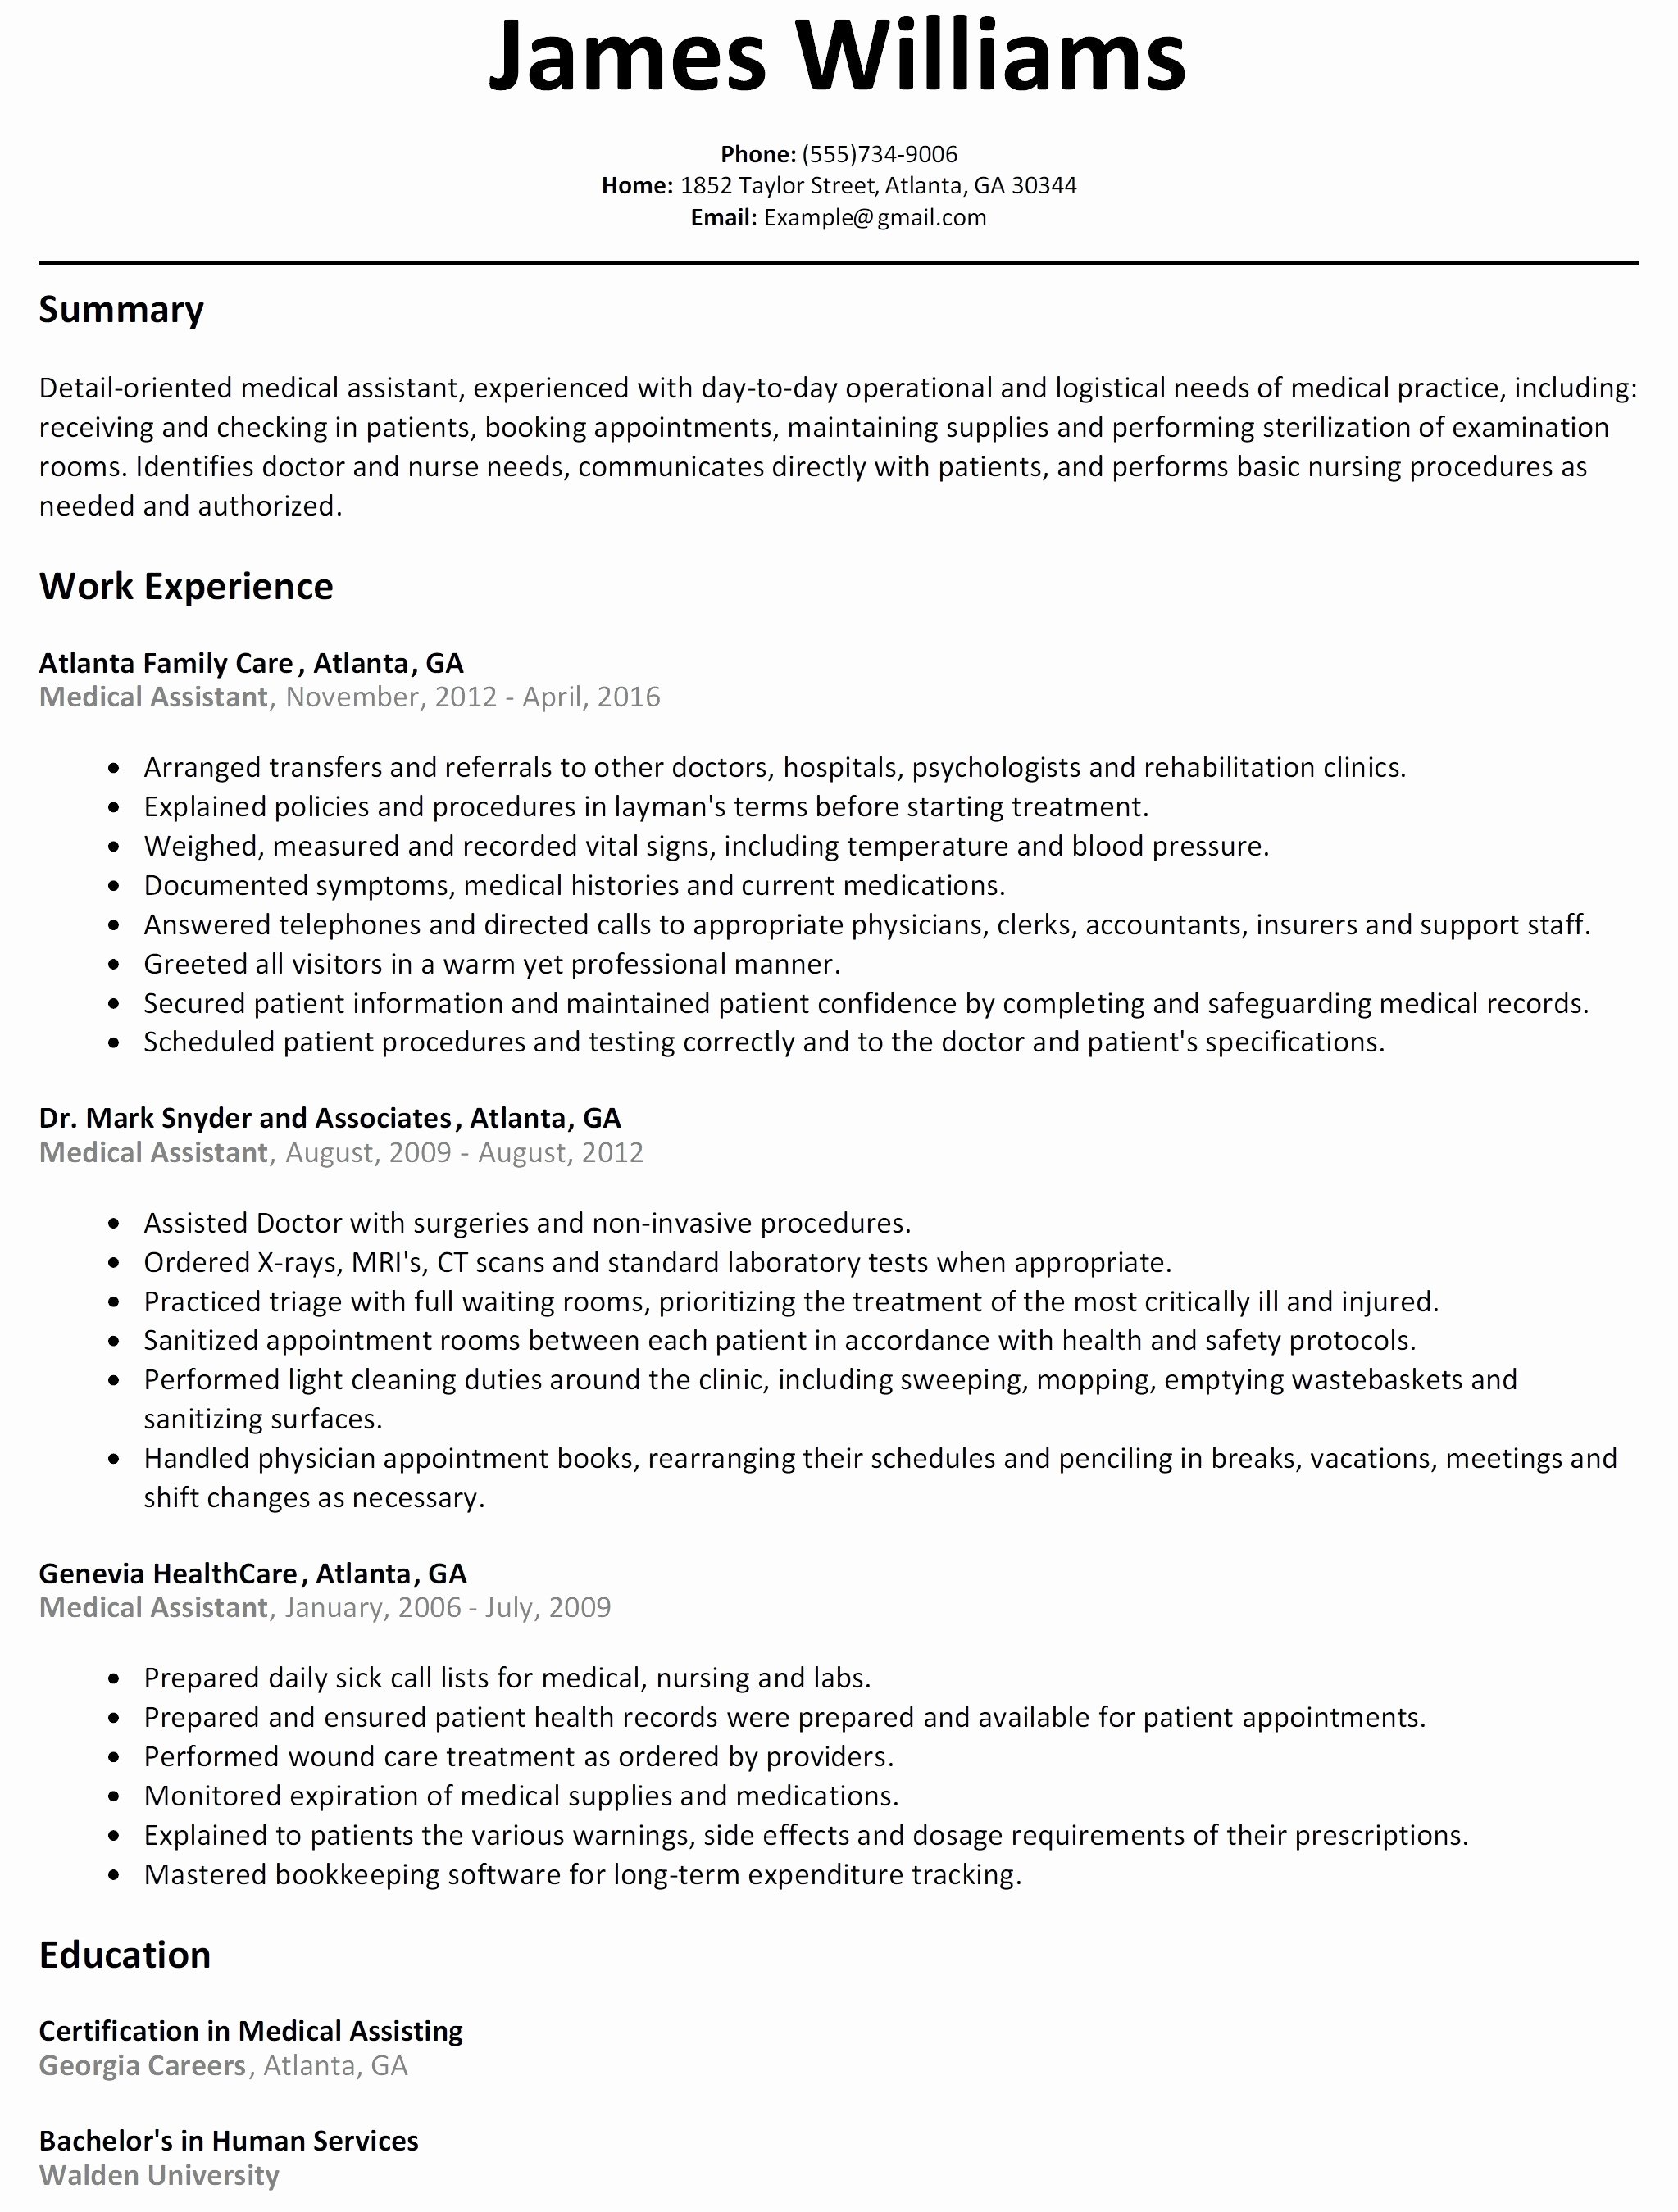 Free Resume Templates for Mac